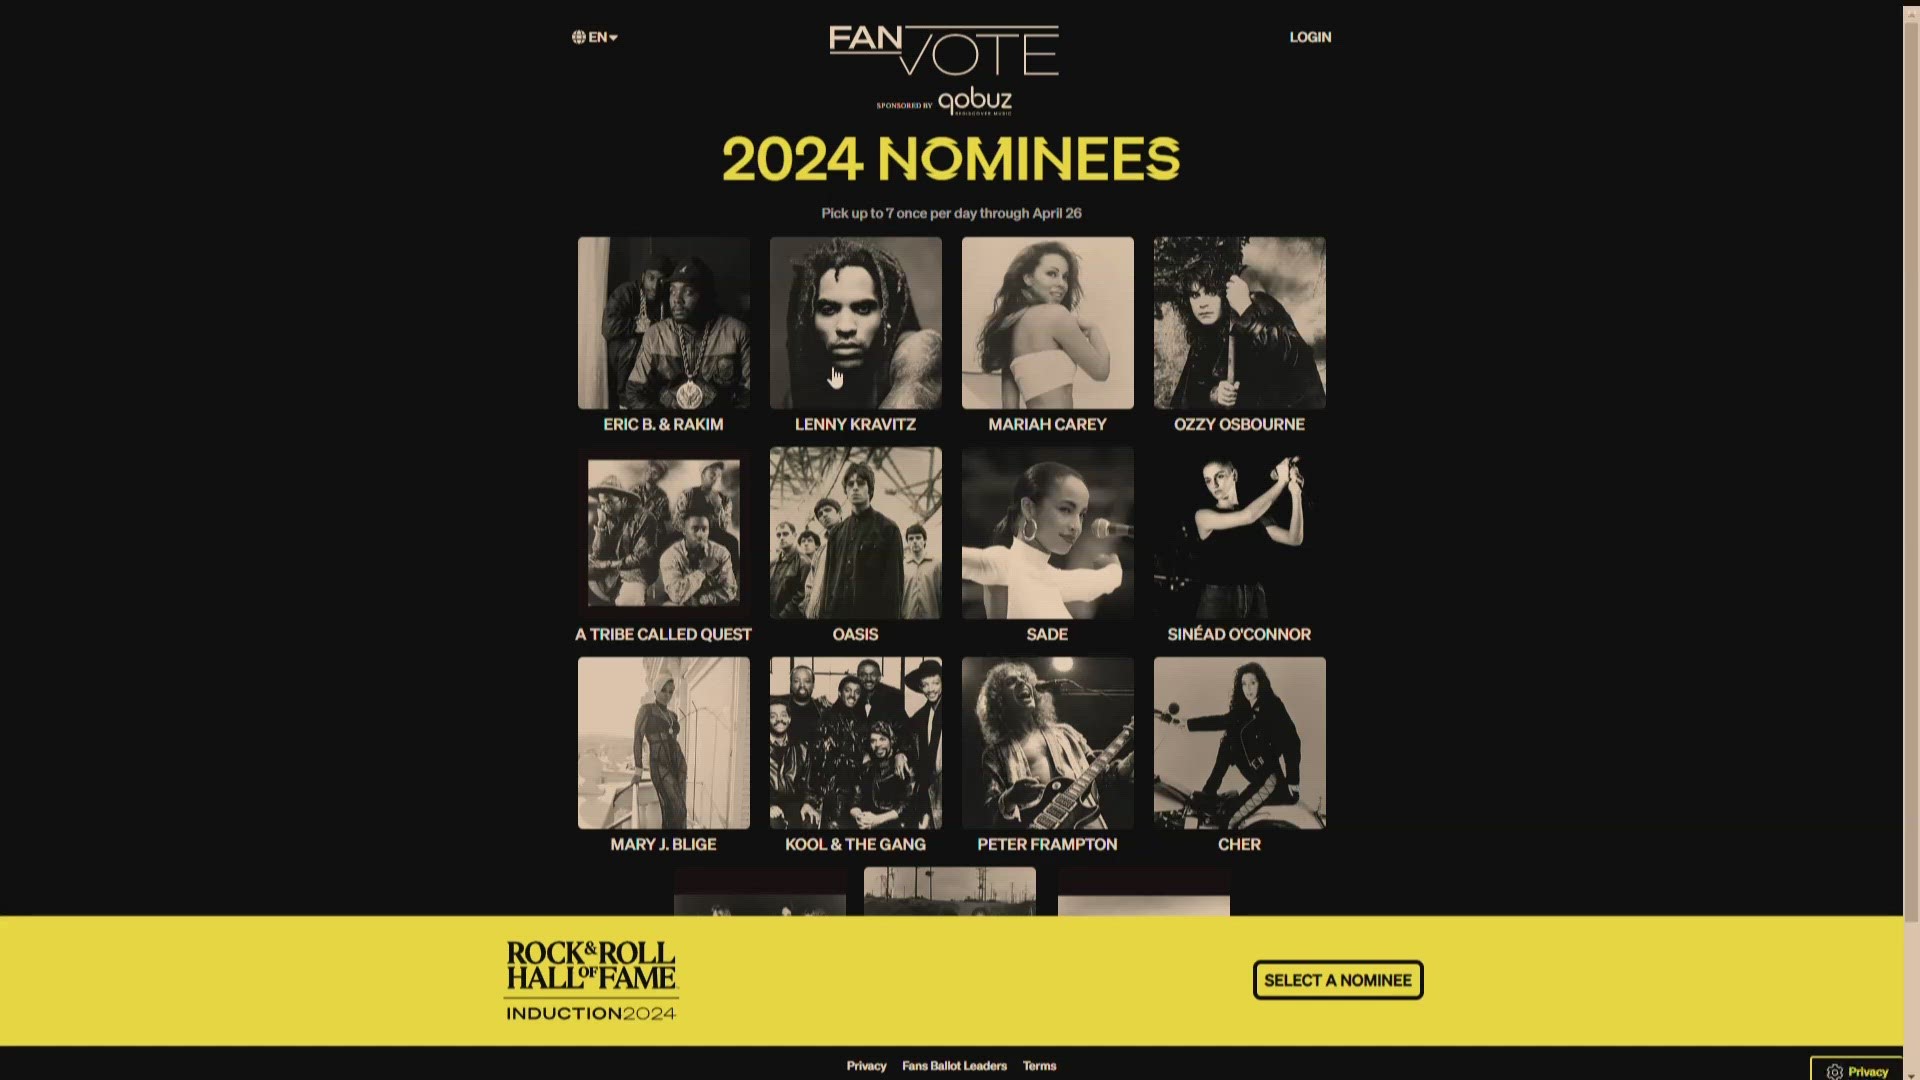 The list of 2024 Rock and Roll Hall of Fame induction nominations includes Mary J. Blige, Mariah Carey, Cher, Dave Matthews Band, Peter Frampton and lots more.